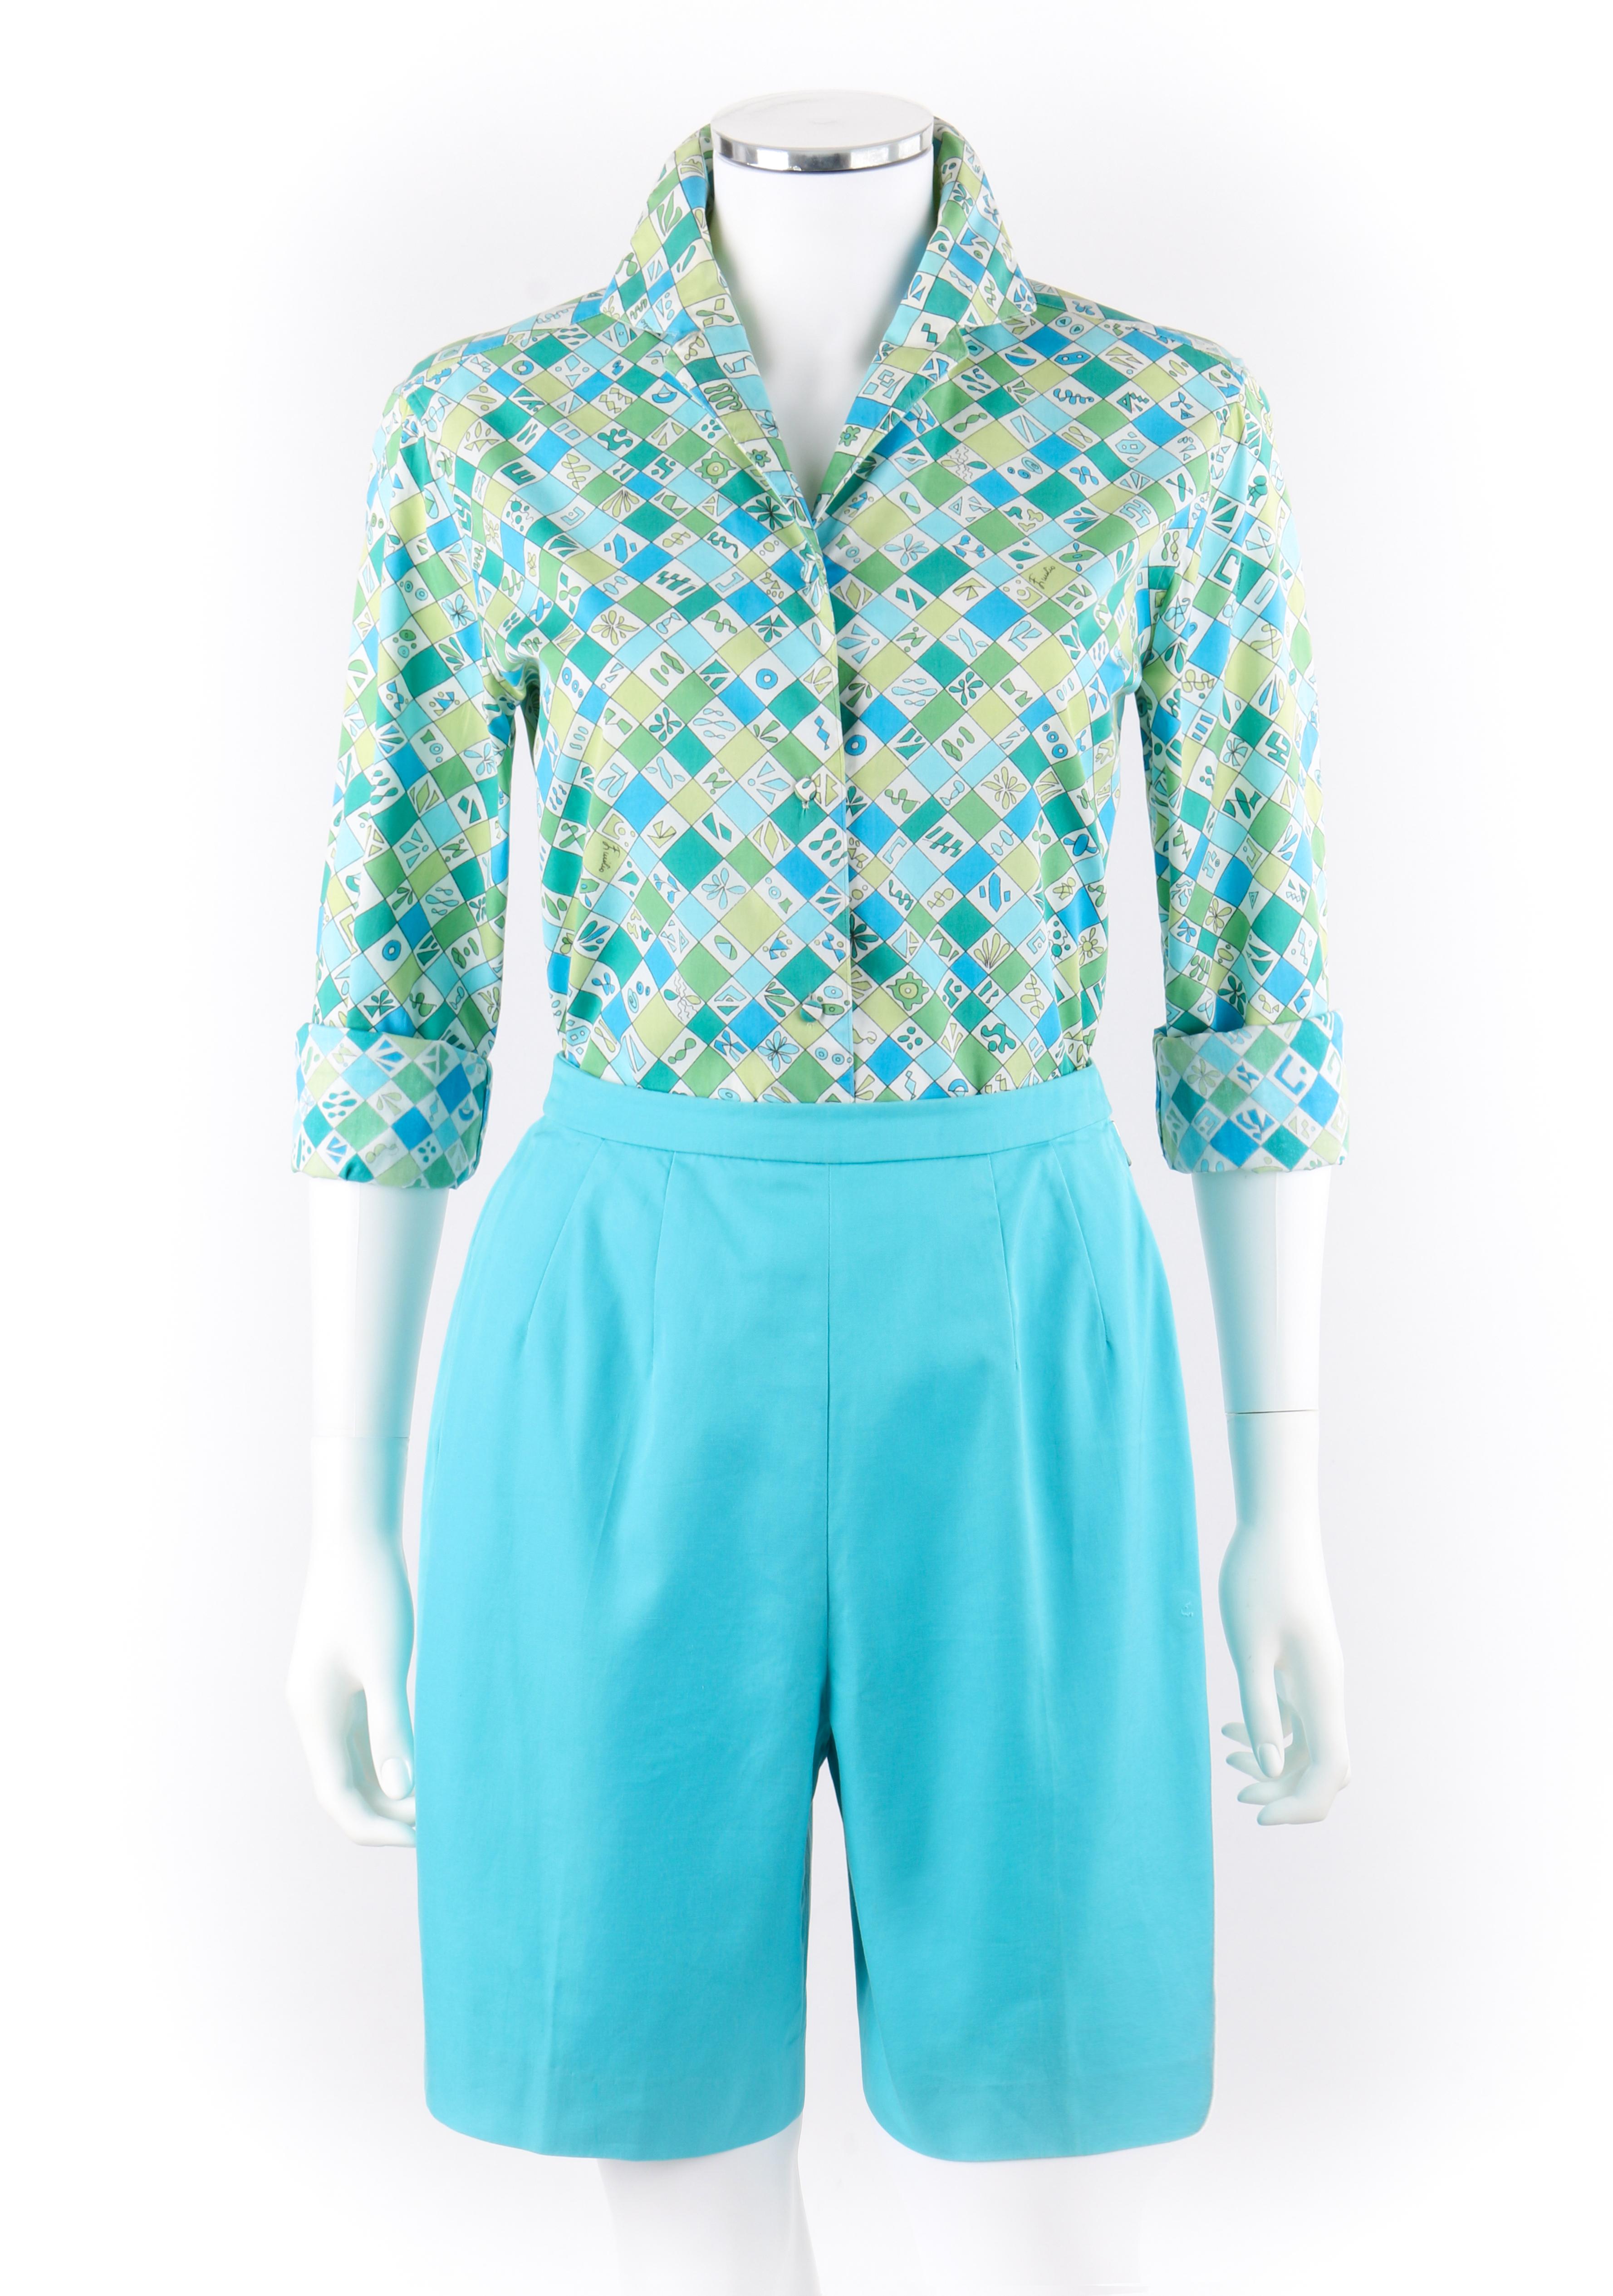 EMILIO PUCCI c.1960’s 2 Pc Teal Multi-color Geometric Signature Print Button Up Shirt Short Set
 
Circa: 1960’s  
Label(s): Emilio Pucci
Style: Button-up shirt, shorts
Color(s): Shades of blue, teal, green, white. 
Lined: No
Marked Fabric Content: